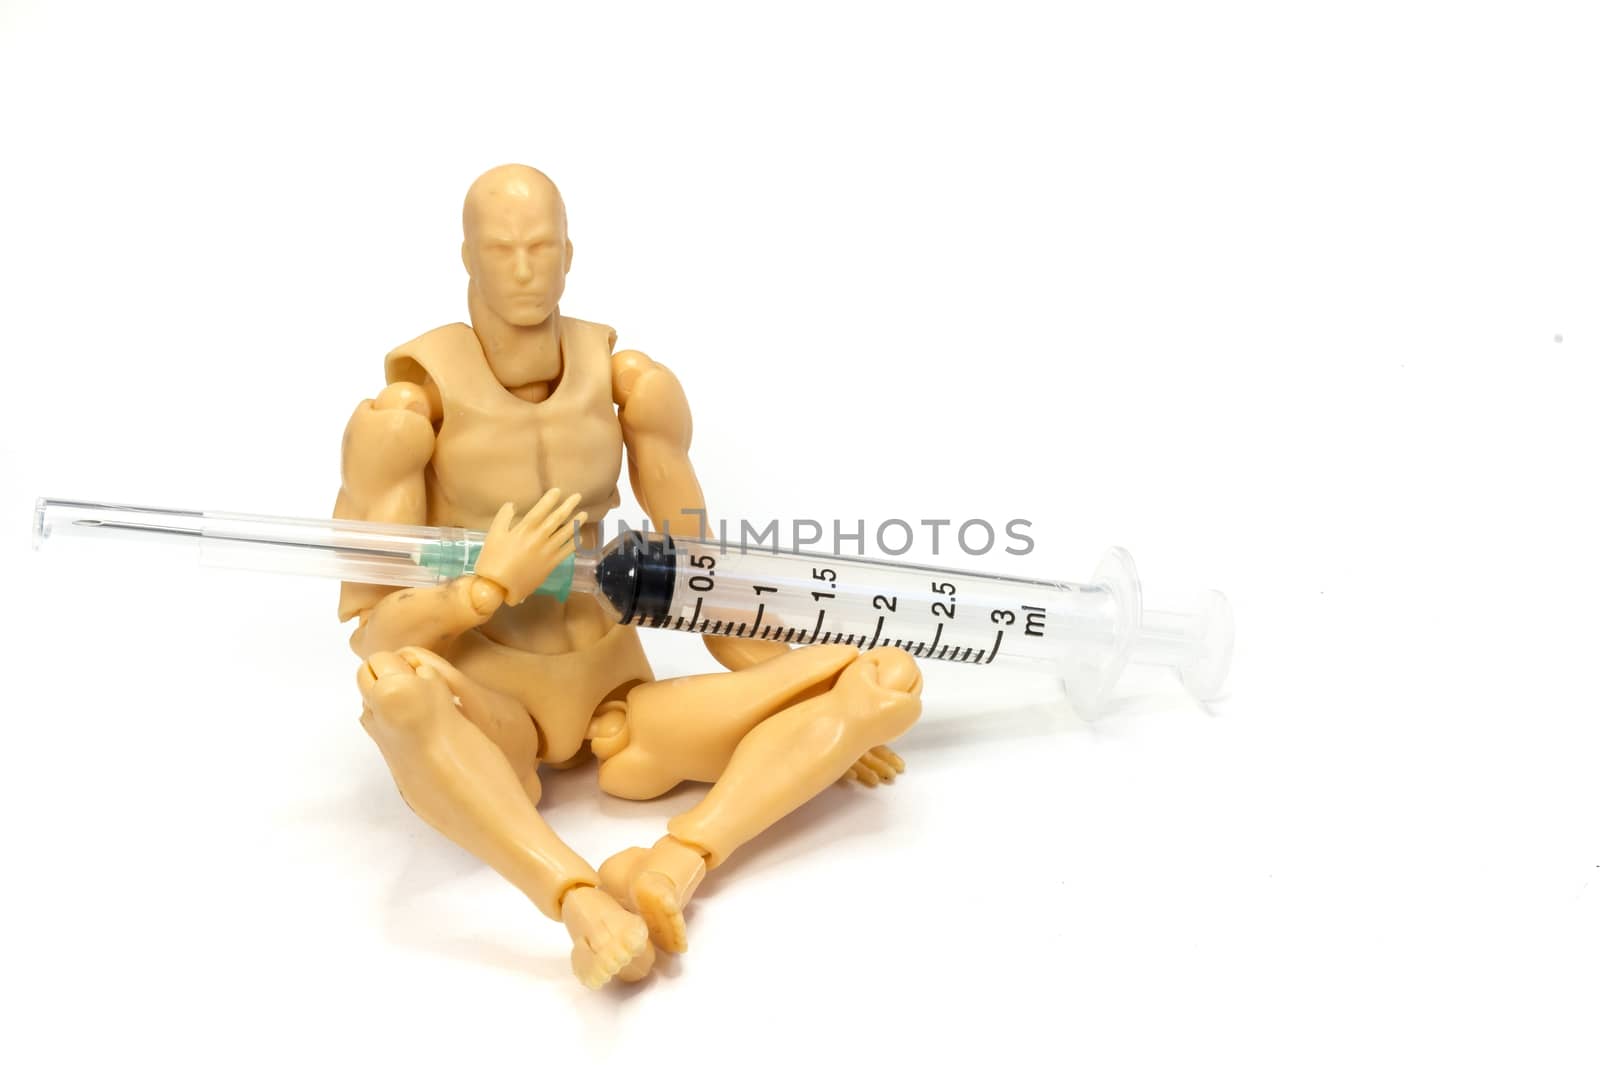 a plastic model holding a needle and a syringe in his hands, drug use or dependent concept, on white background